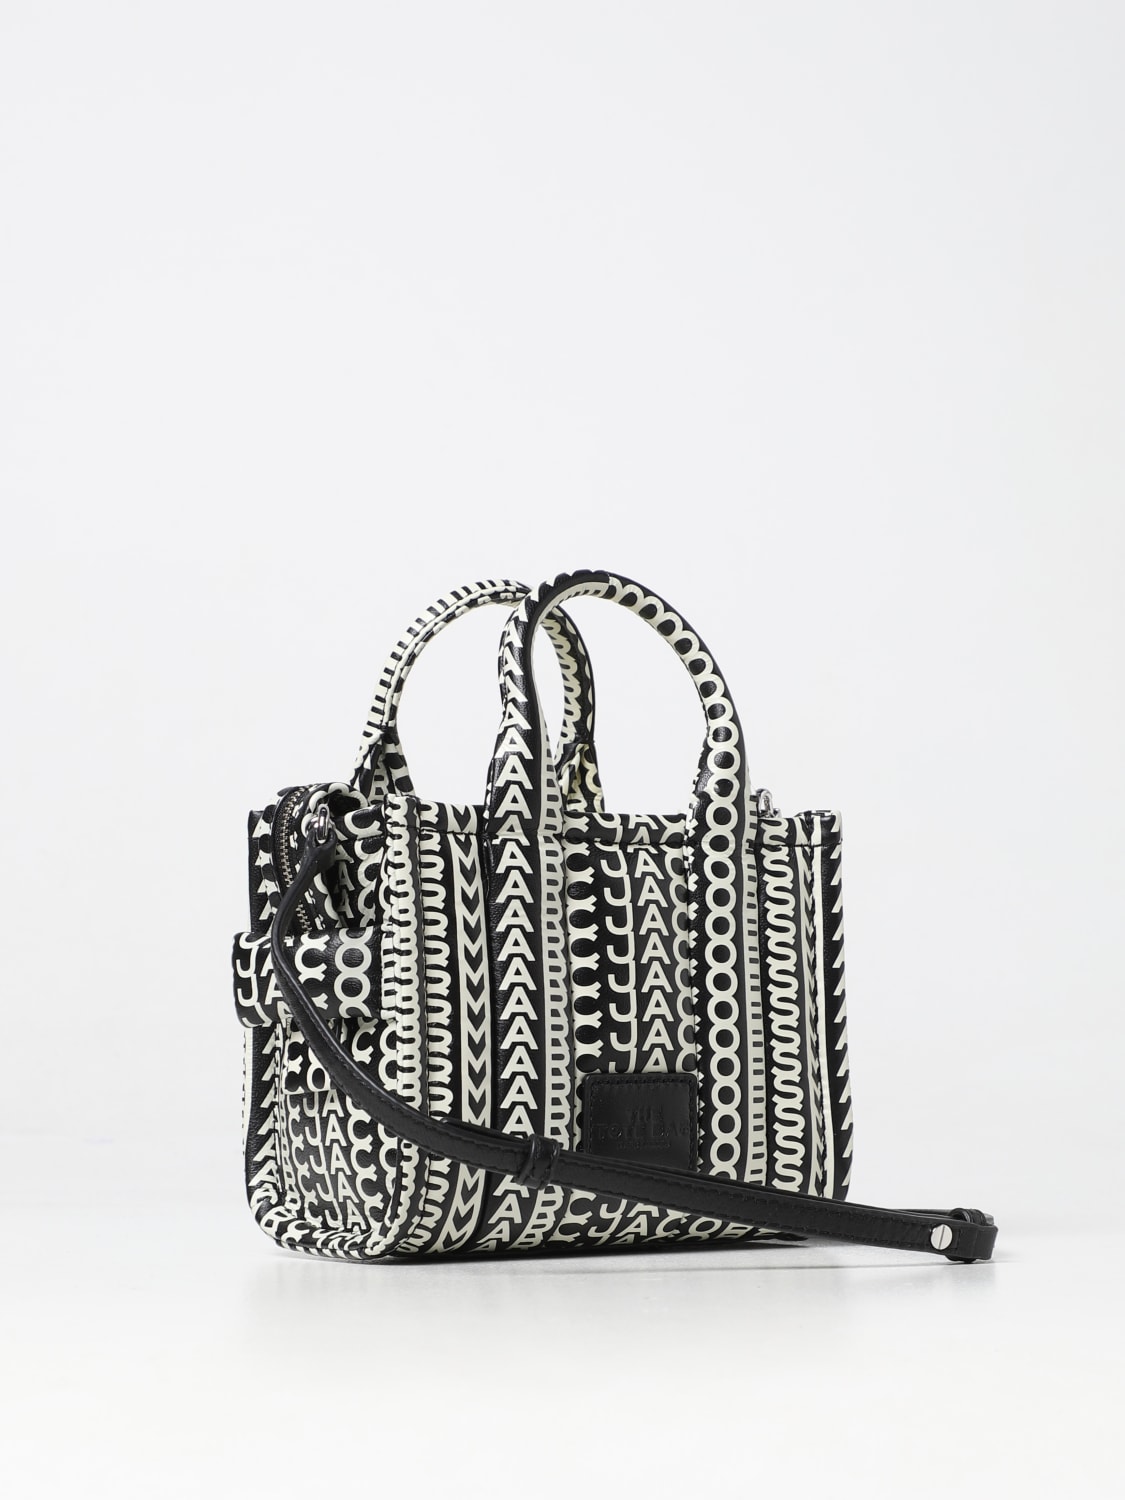 Buy MARC JACOBS Tote Bag with Logo Print, Black Color Women